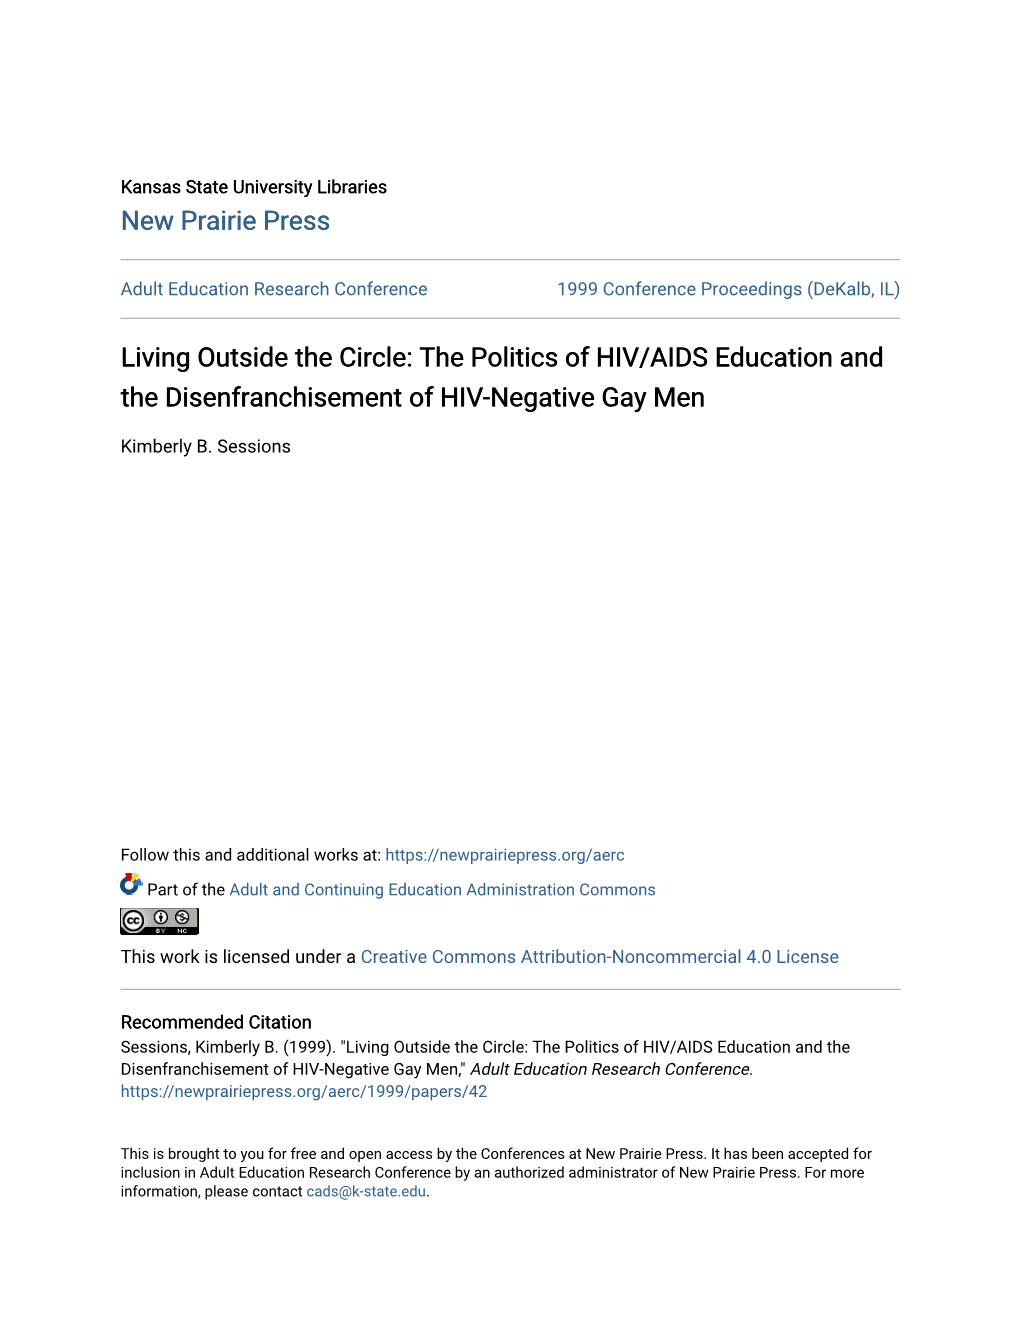 Living Outside the Circle: the Politics of HIV/AIDS Education and the Disenfranchisement of HIV-Negative Gay Men